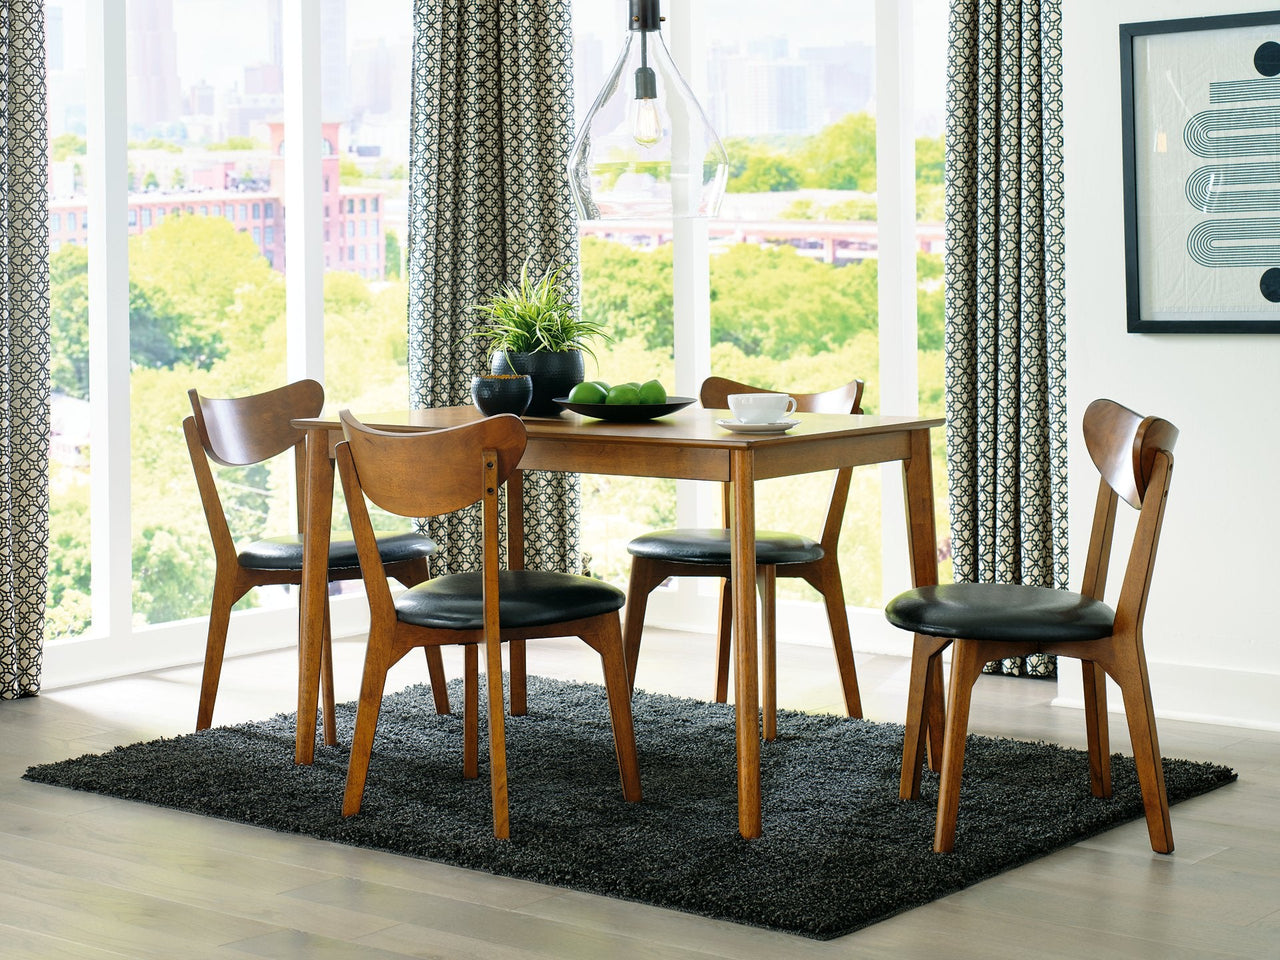 Parrenfield Dining Table and Chairs Set of 5 image